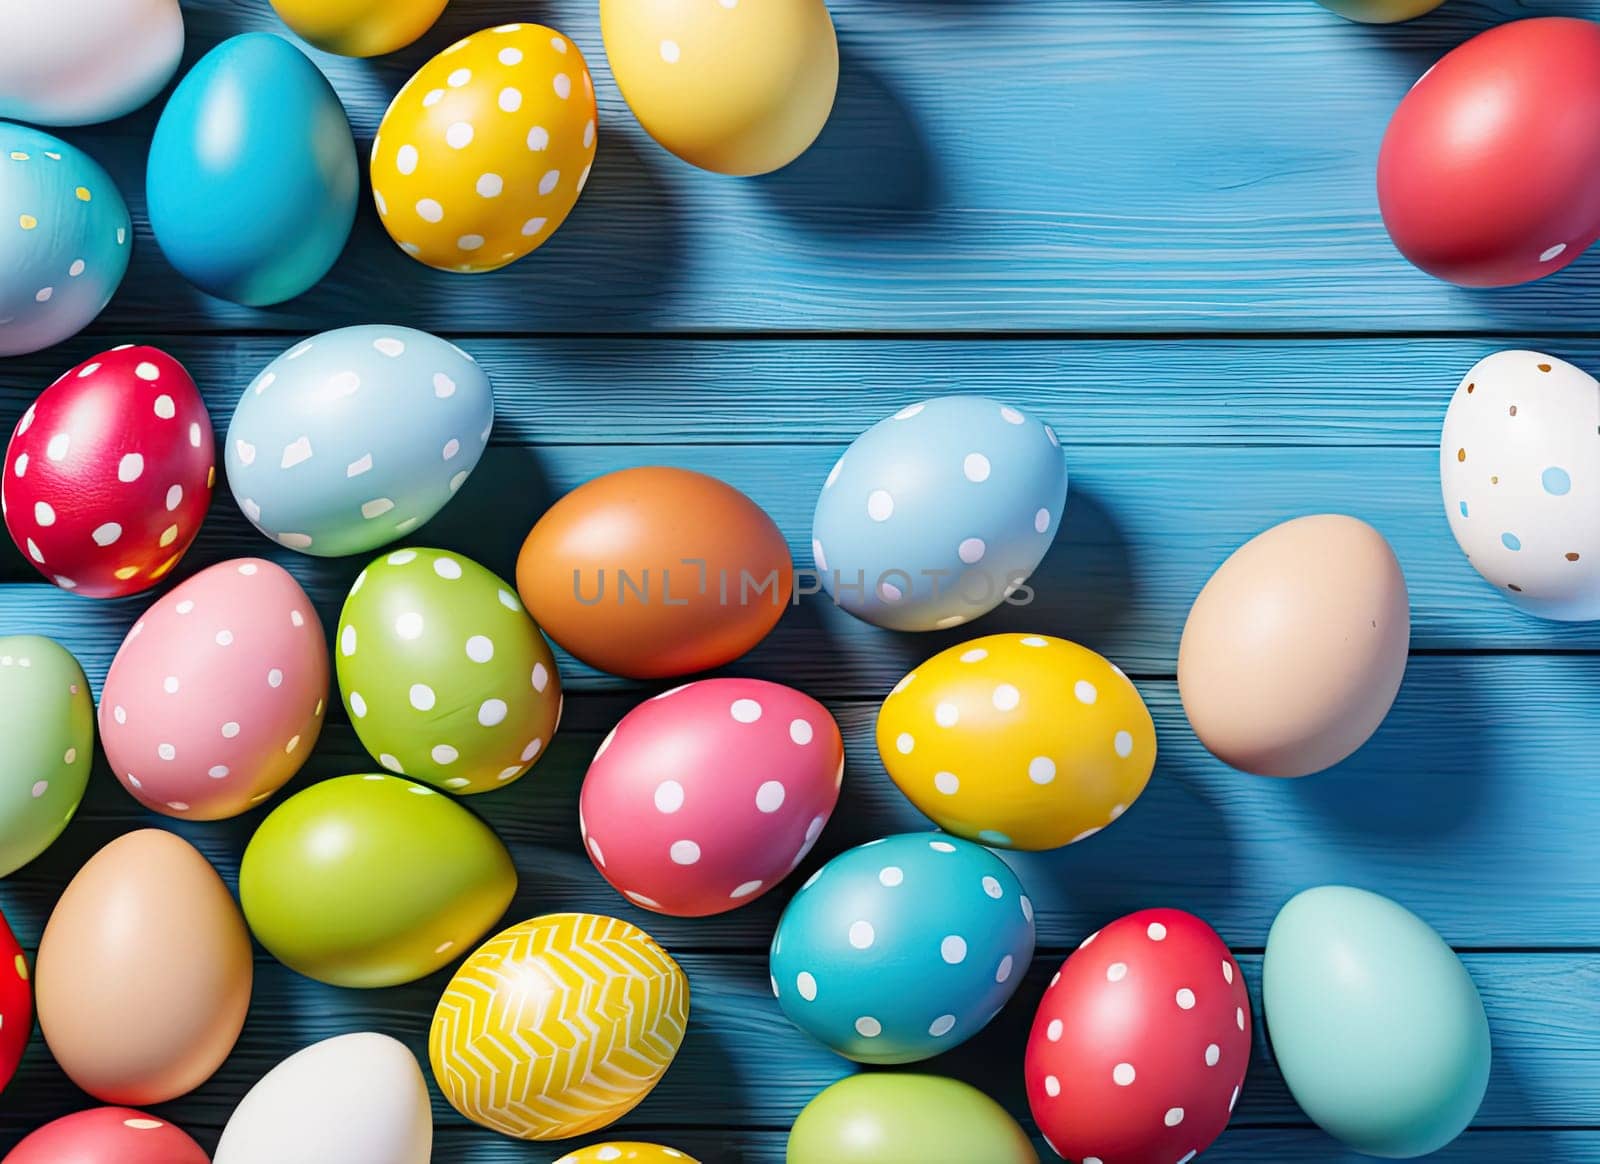 Colorful Easter eggs by Ladouski